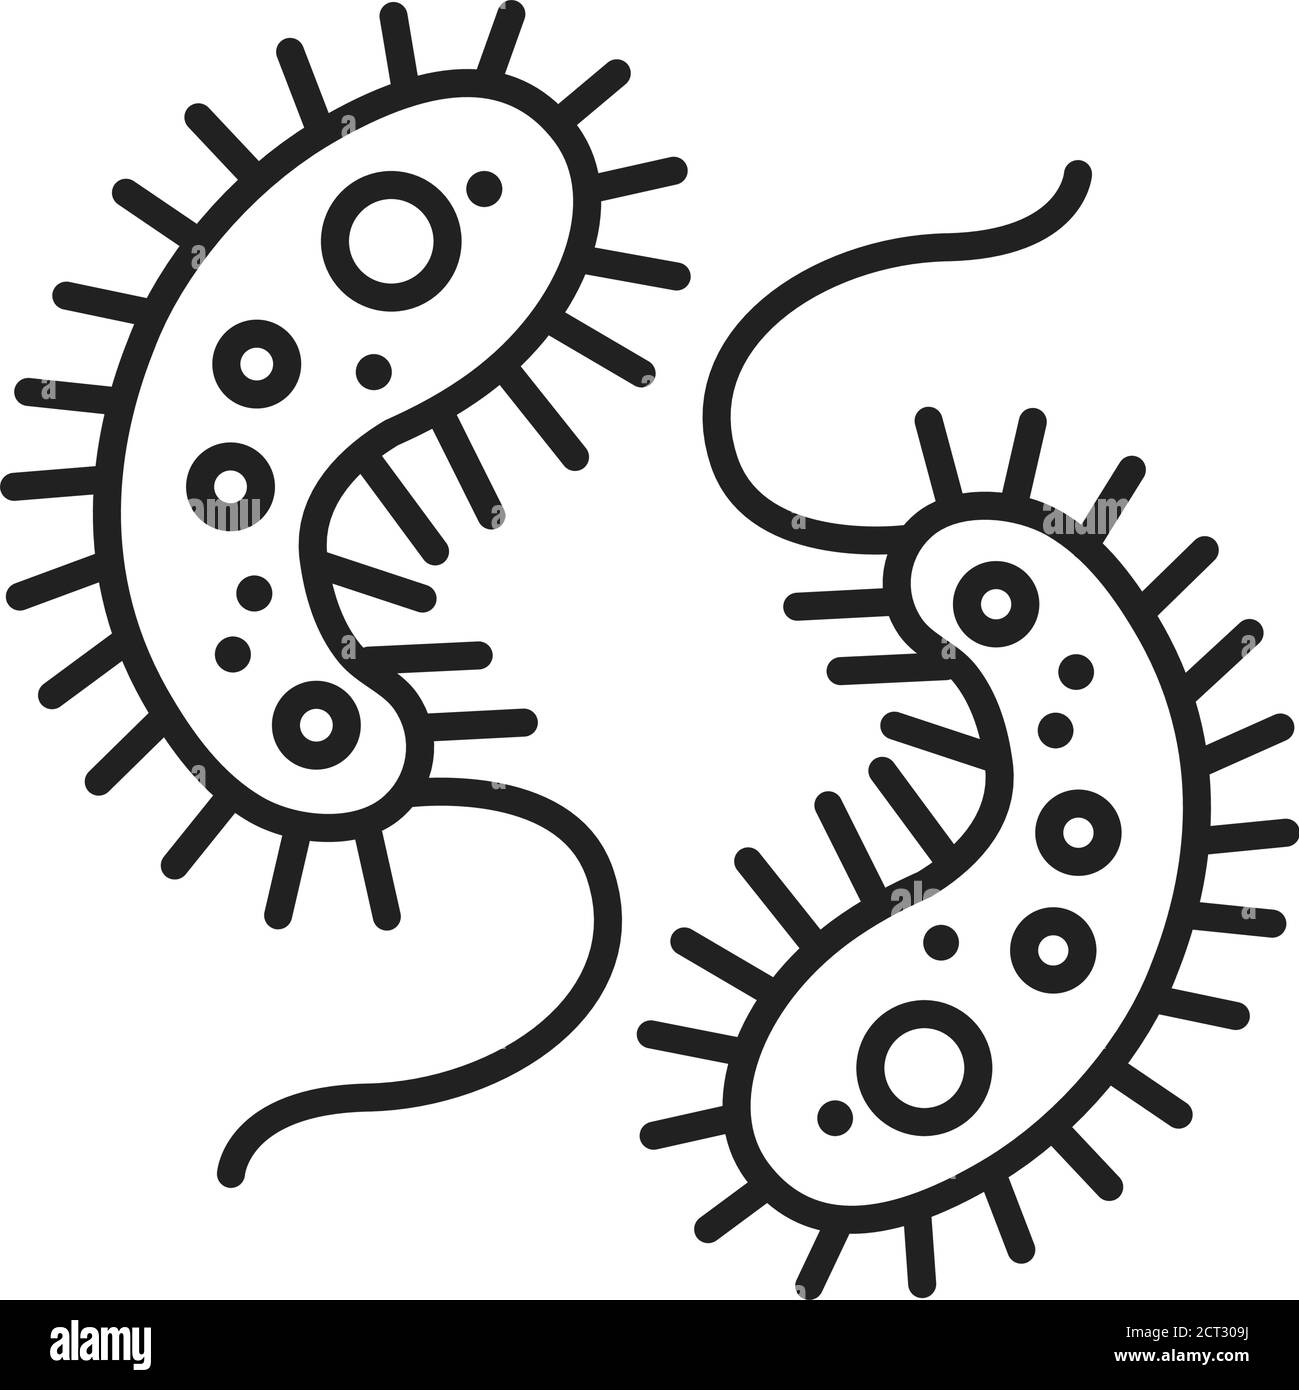 Virus black line icon. Respiratory infections. Bacteria, microorganism sign. Microscopic germ cause diseases concept. Pictogram for web, mobile app Stock Vector